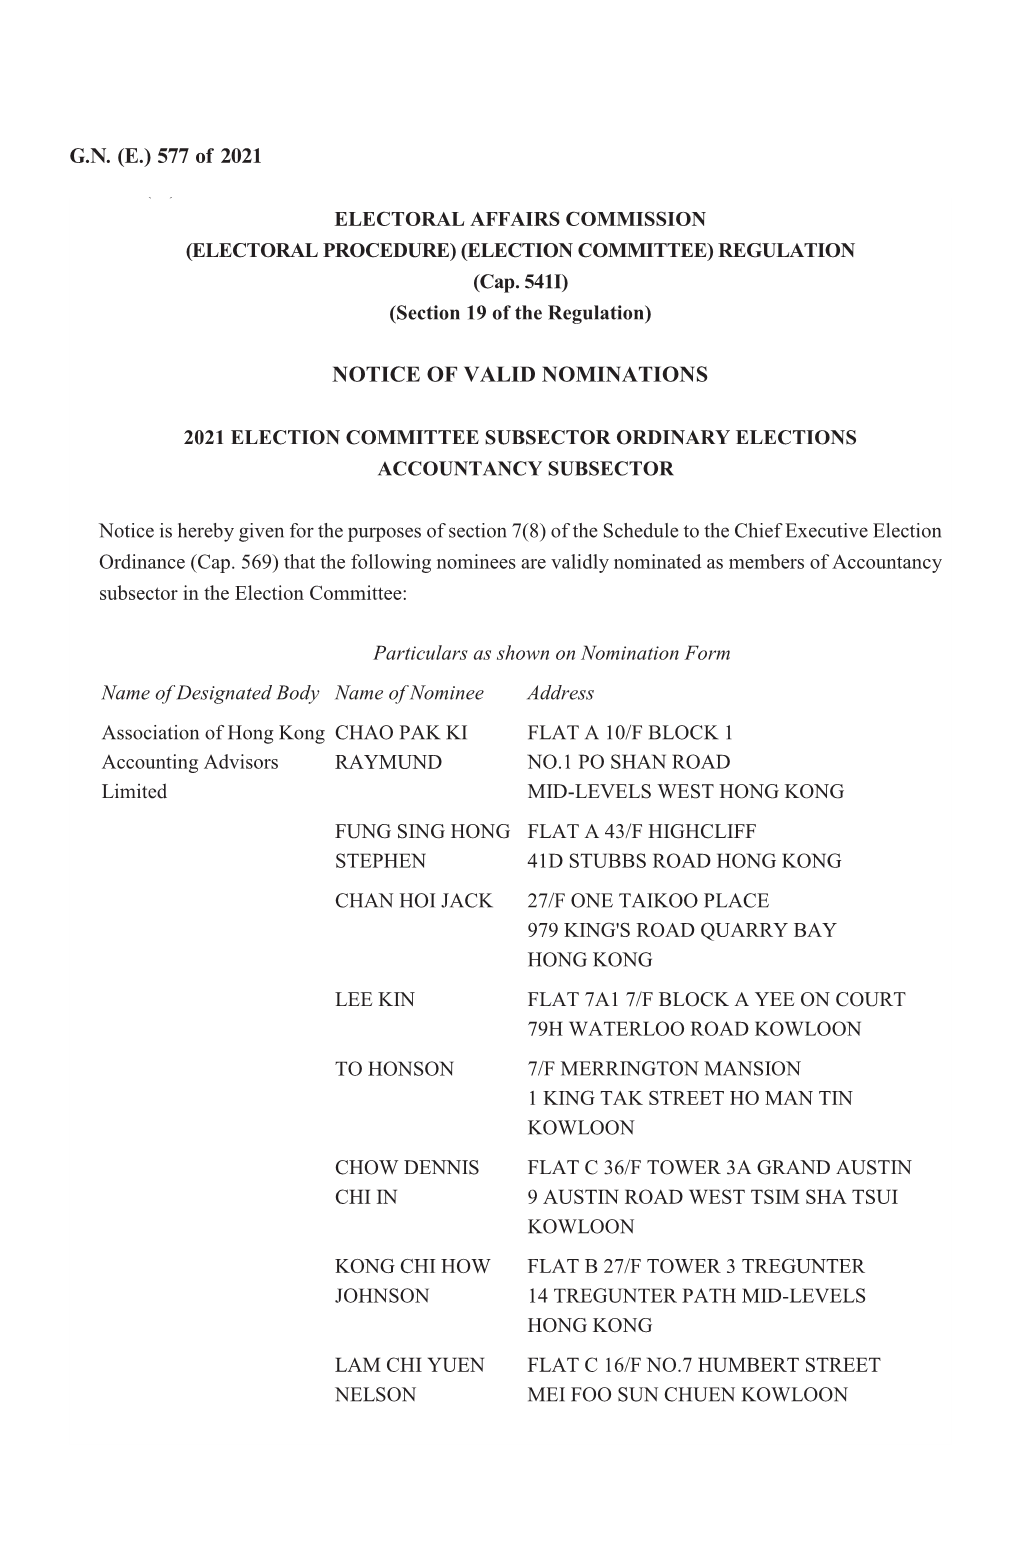 G.N. (E.) 577 of 2021 NOTICE of VALID NOMINATIONS